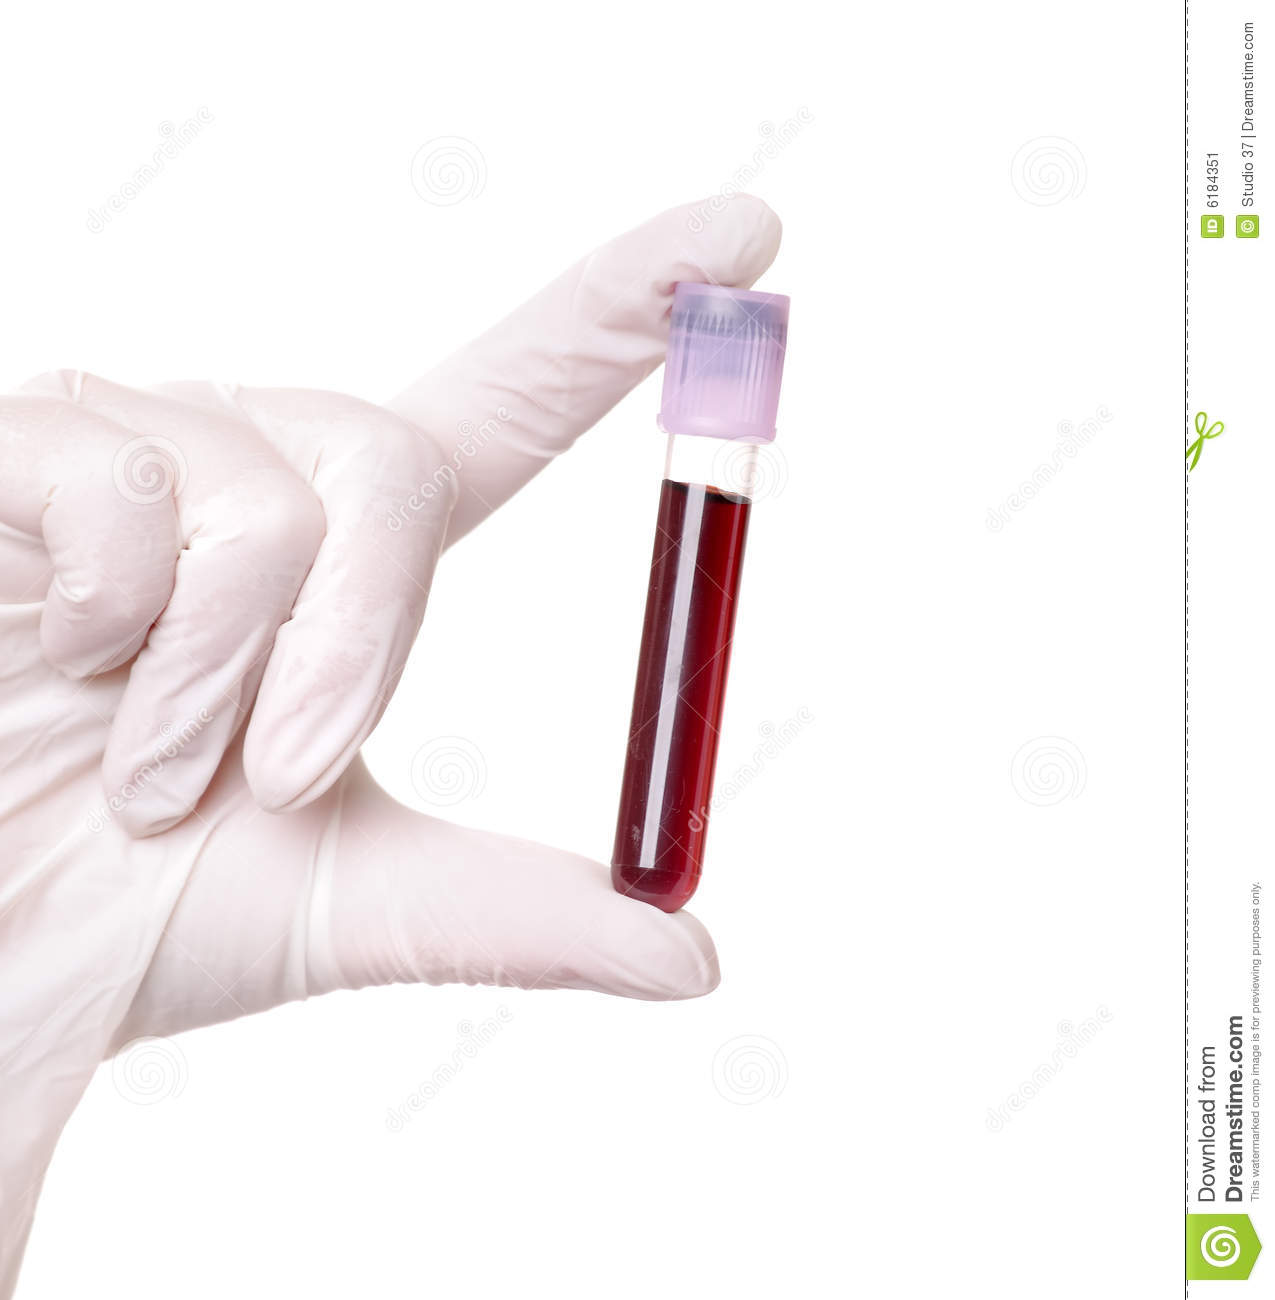 Hand Holding Blood In Test Tube Stock Image   Image  6184351